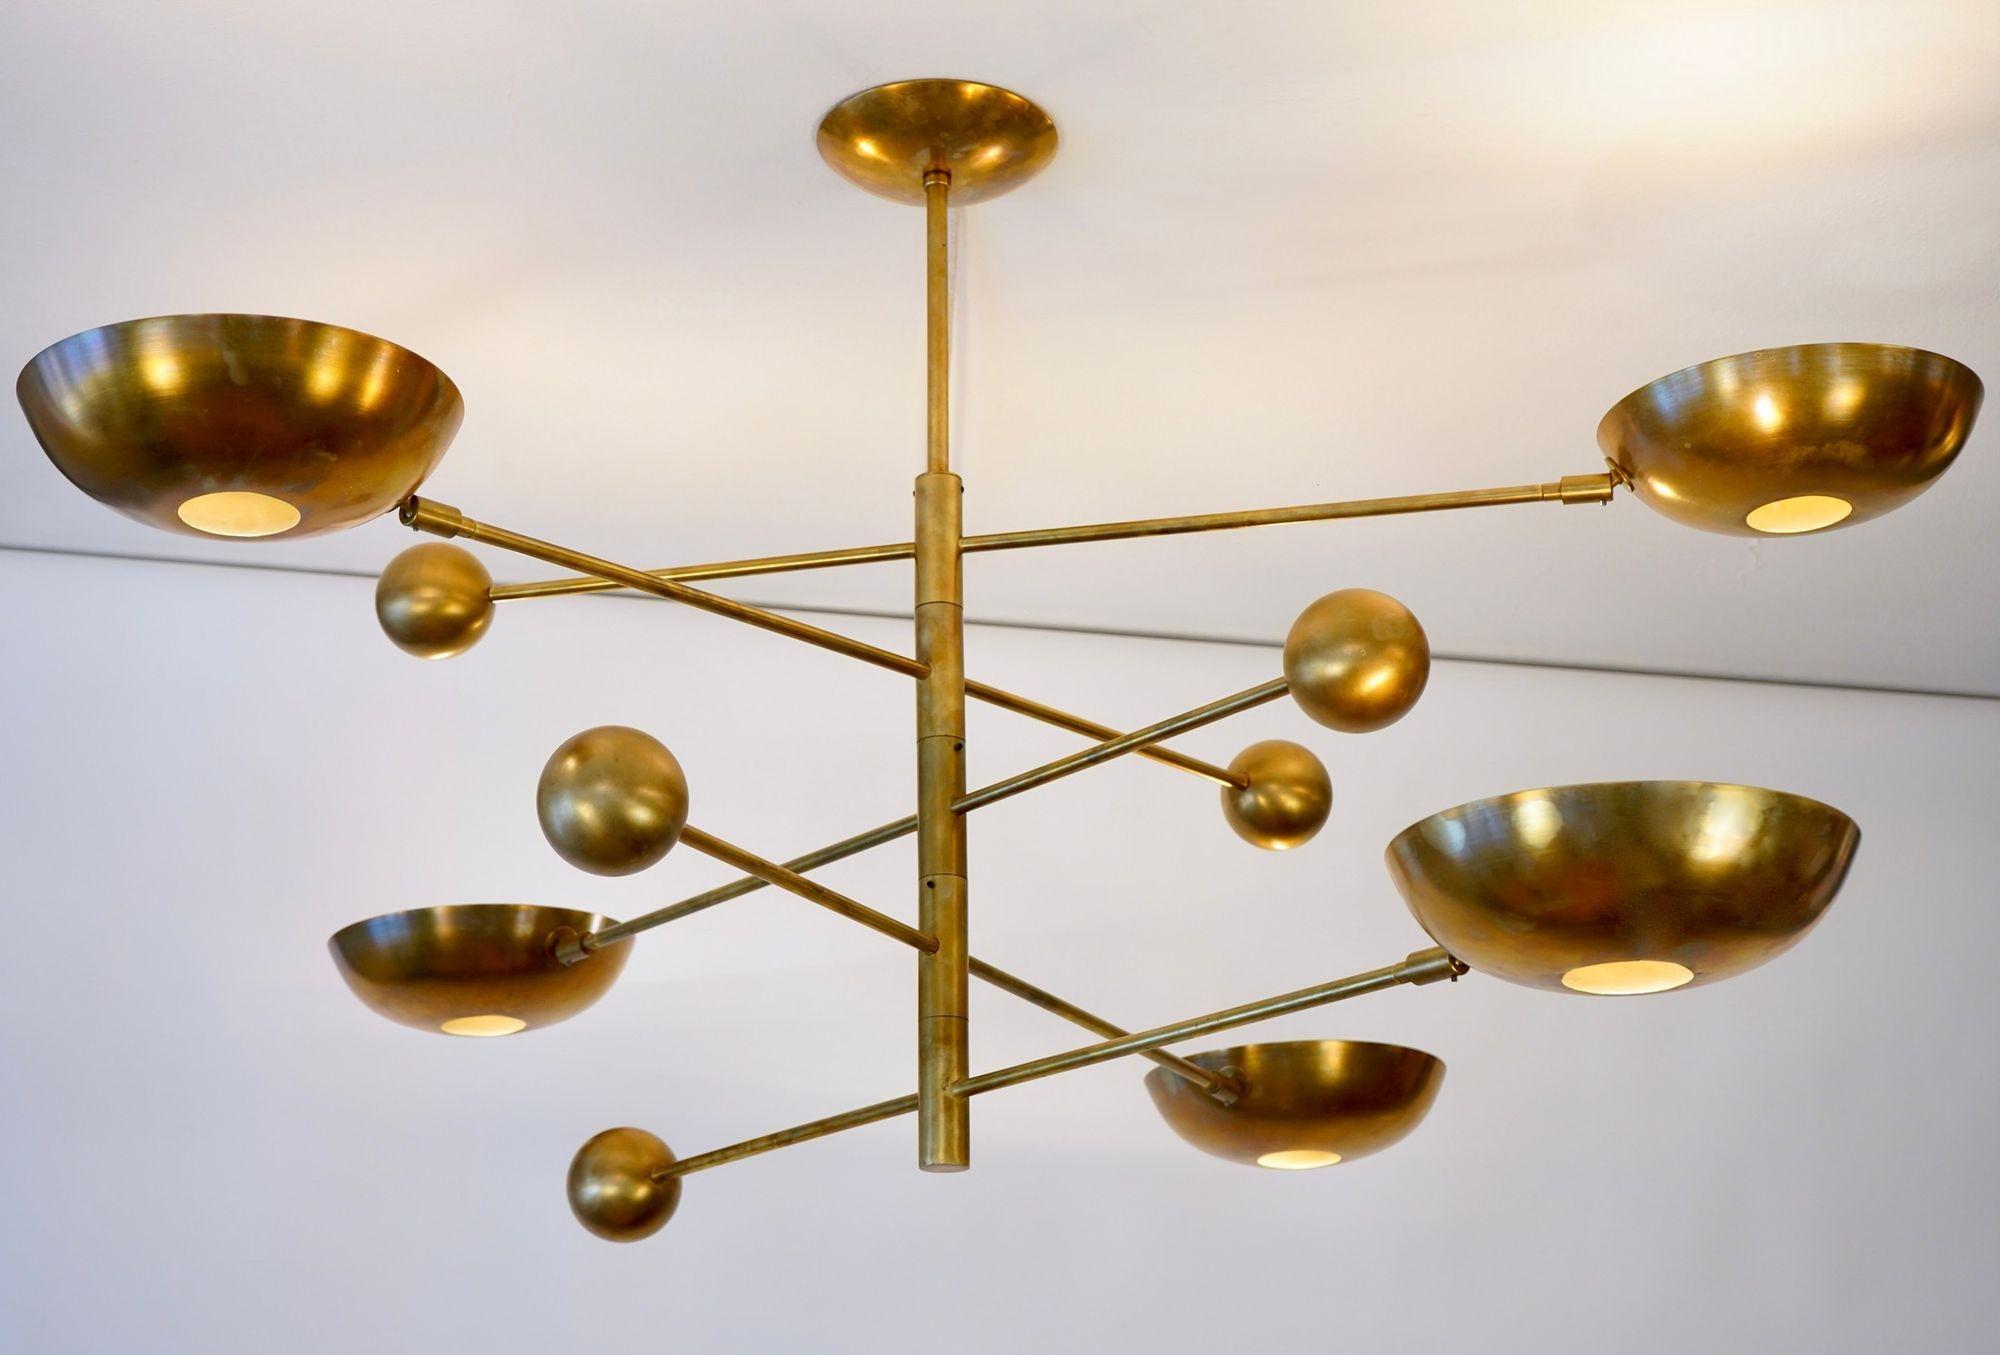 After many requests of customization in all brass and patina of the orbitale chandelier I decided to go ahead with a separate listing.

This all brass version is possible as the orbitale is made of solid brass in all it's components.
Patina is the